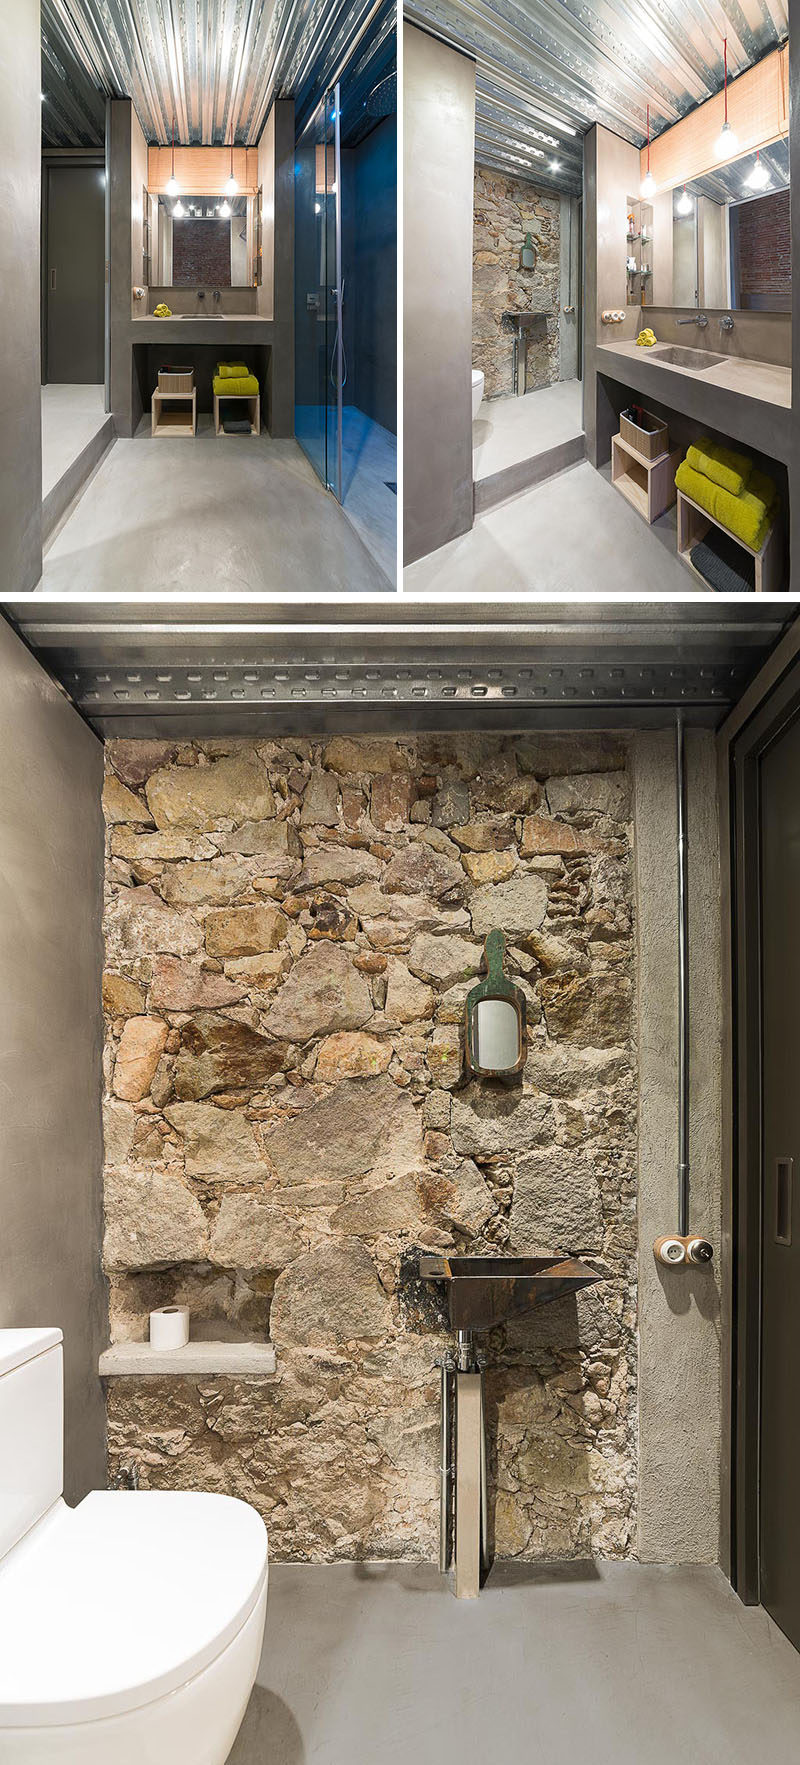 In this renovated bathroom,, the vanity area and shower are stepped down from the toilet, and a metal ceiling helps to keep things bright. While the original stone wall has become a feature wall.